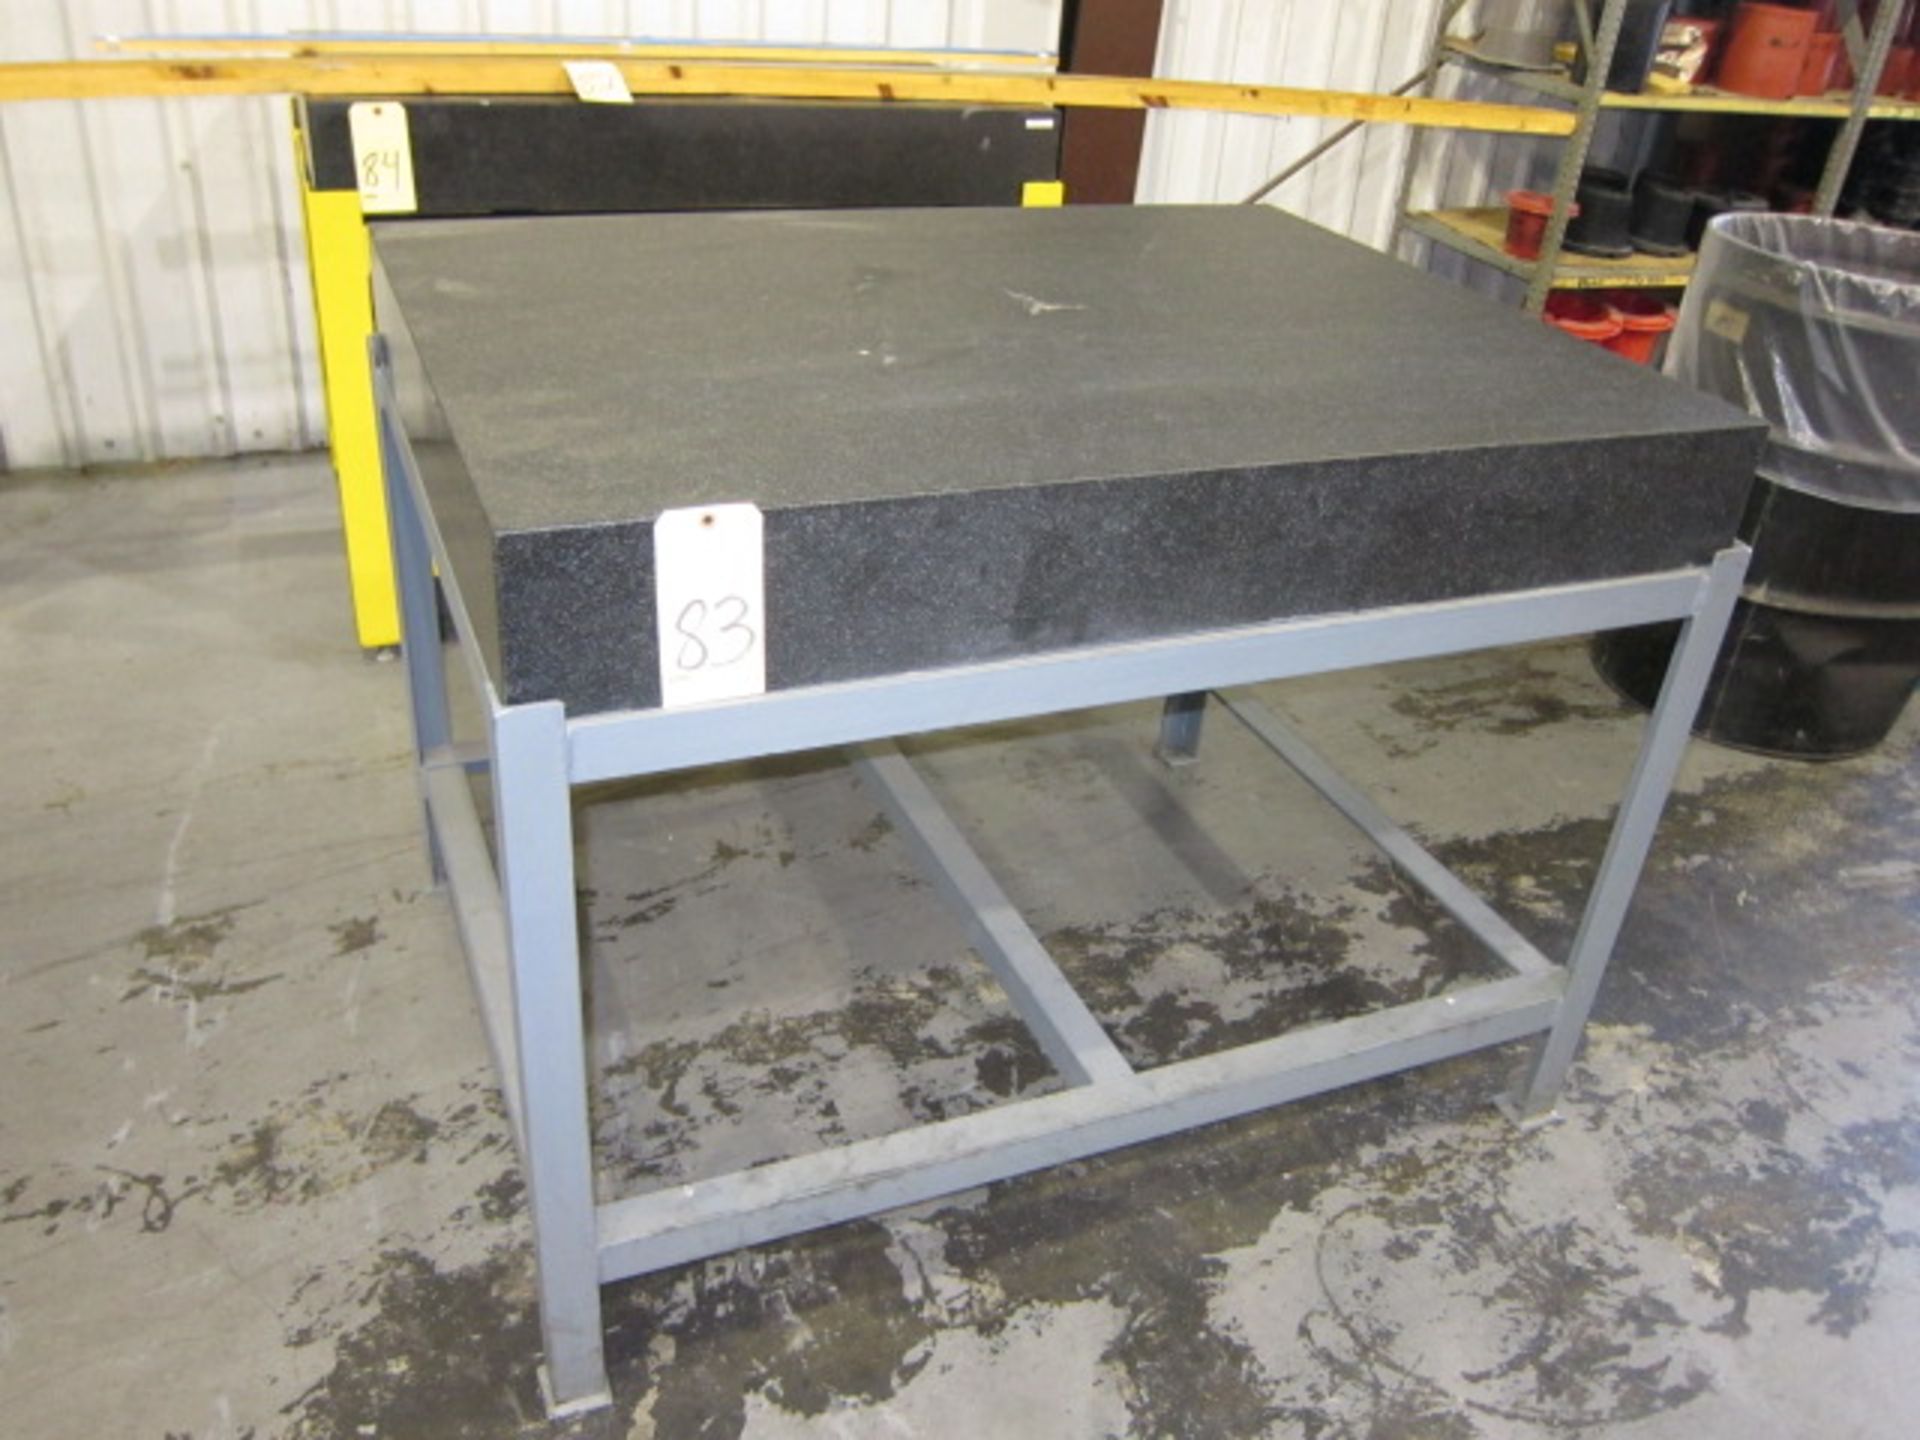 PRECISION GRANITE SURFACE PLATE, 36" x 48" x 6" thk., fabricated stand